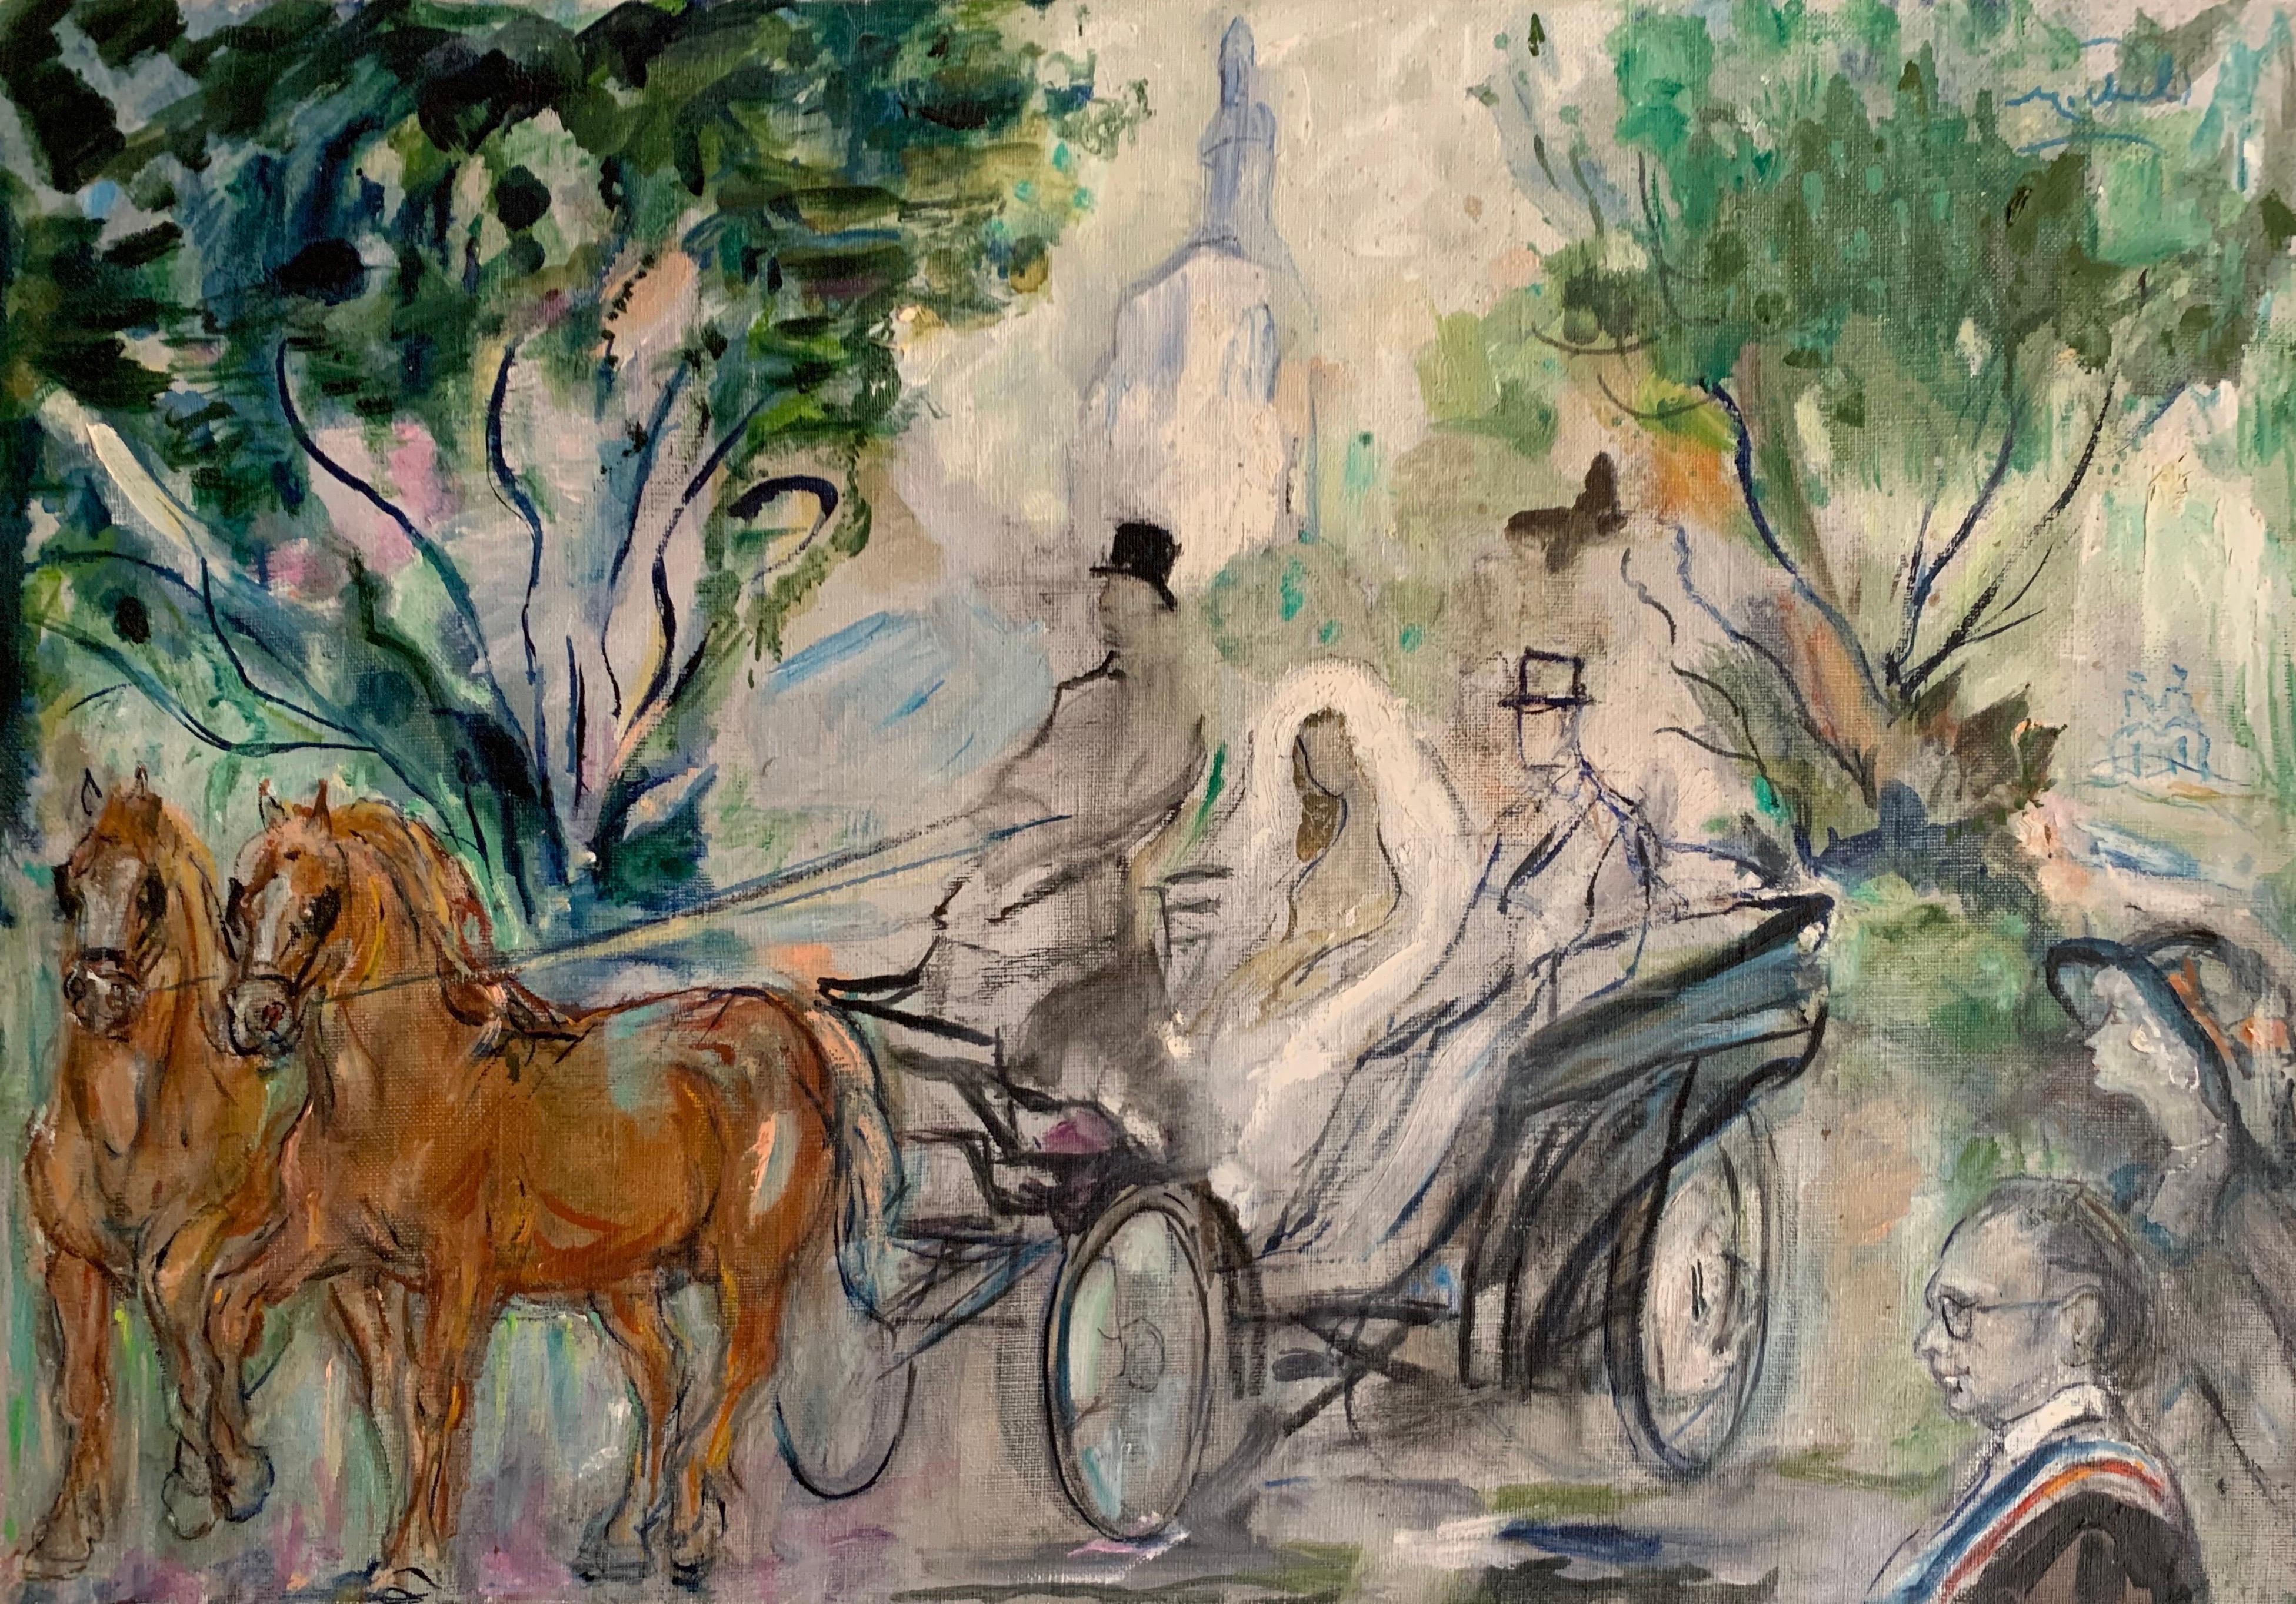 Janie Michels Figurative Painting - The Wedding Carriage - Bridge & Groom leaving Church - Pupil of Matisse